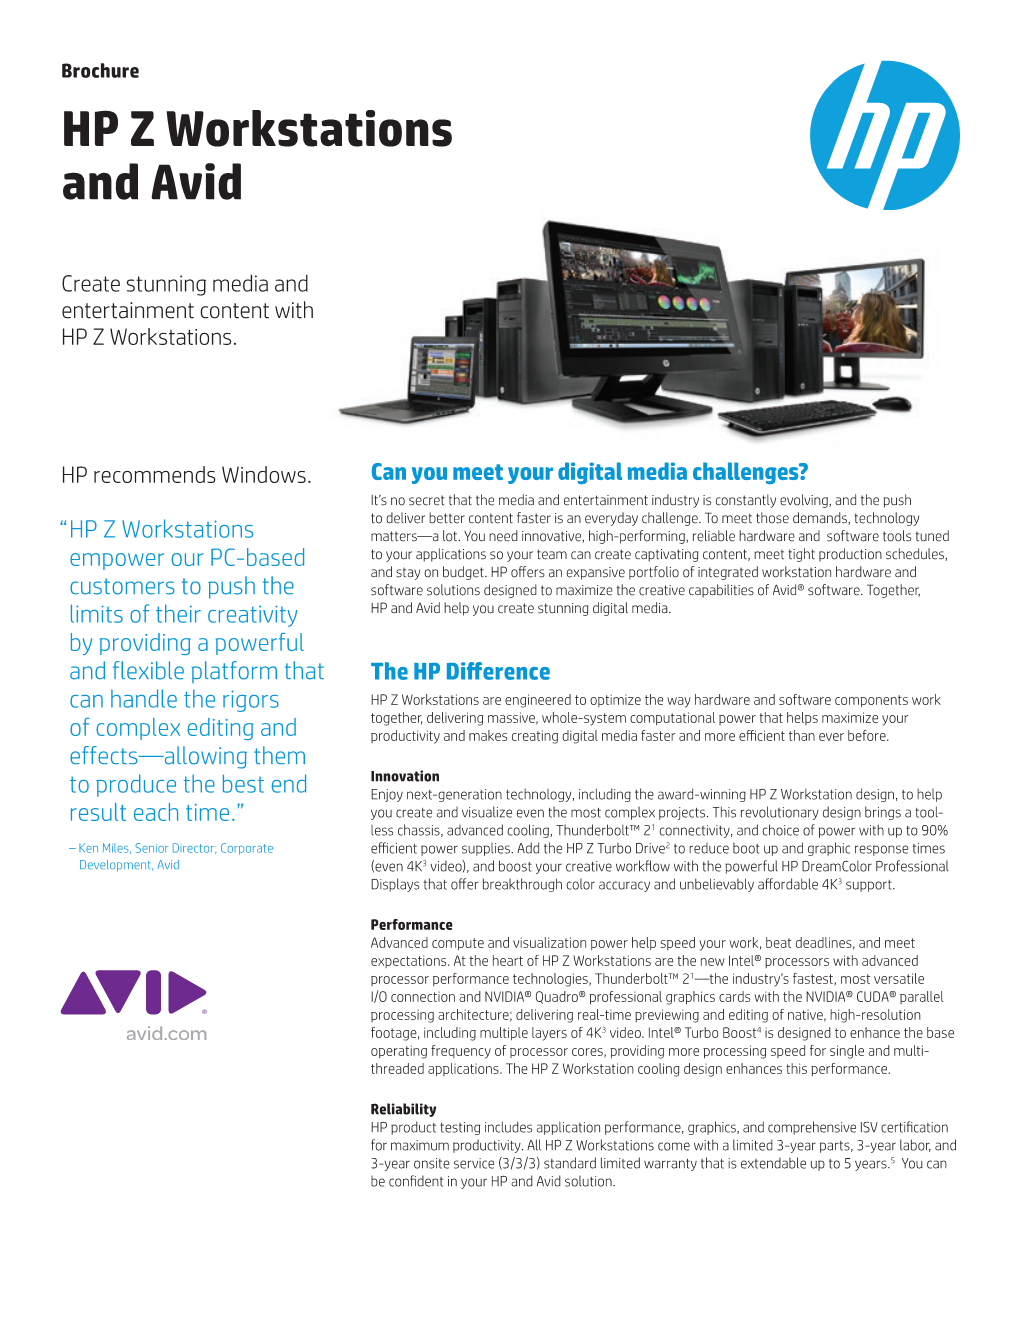 HP Z Workstations and Avid